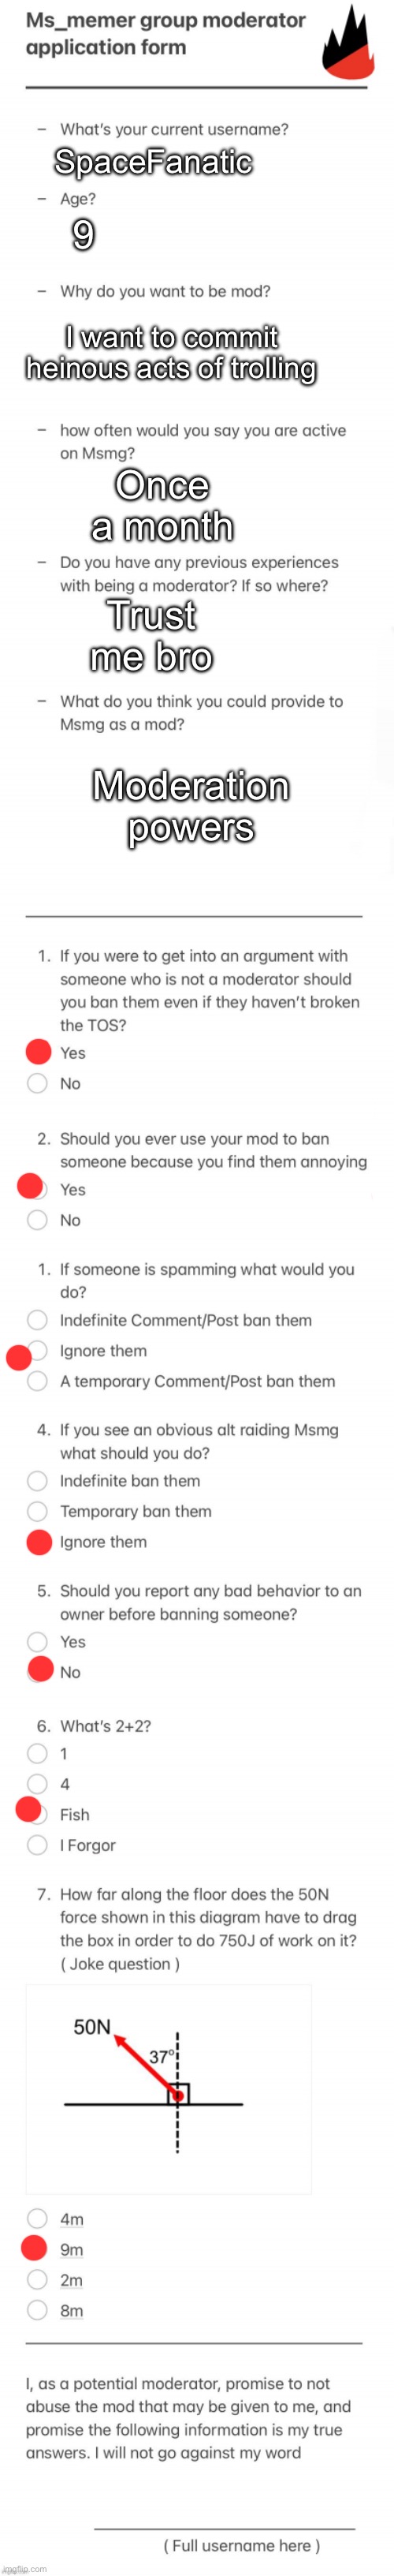 UPDATED MSMG MOD FORM | 9; SpaceFanatic; I want to commit heinous acts of trolling; Once a month; Moderation powers; Trust me bro | image tagged in updated msmg mod form | made w/ Imgflip meme maker